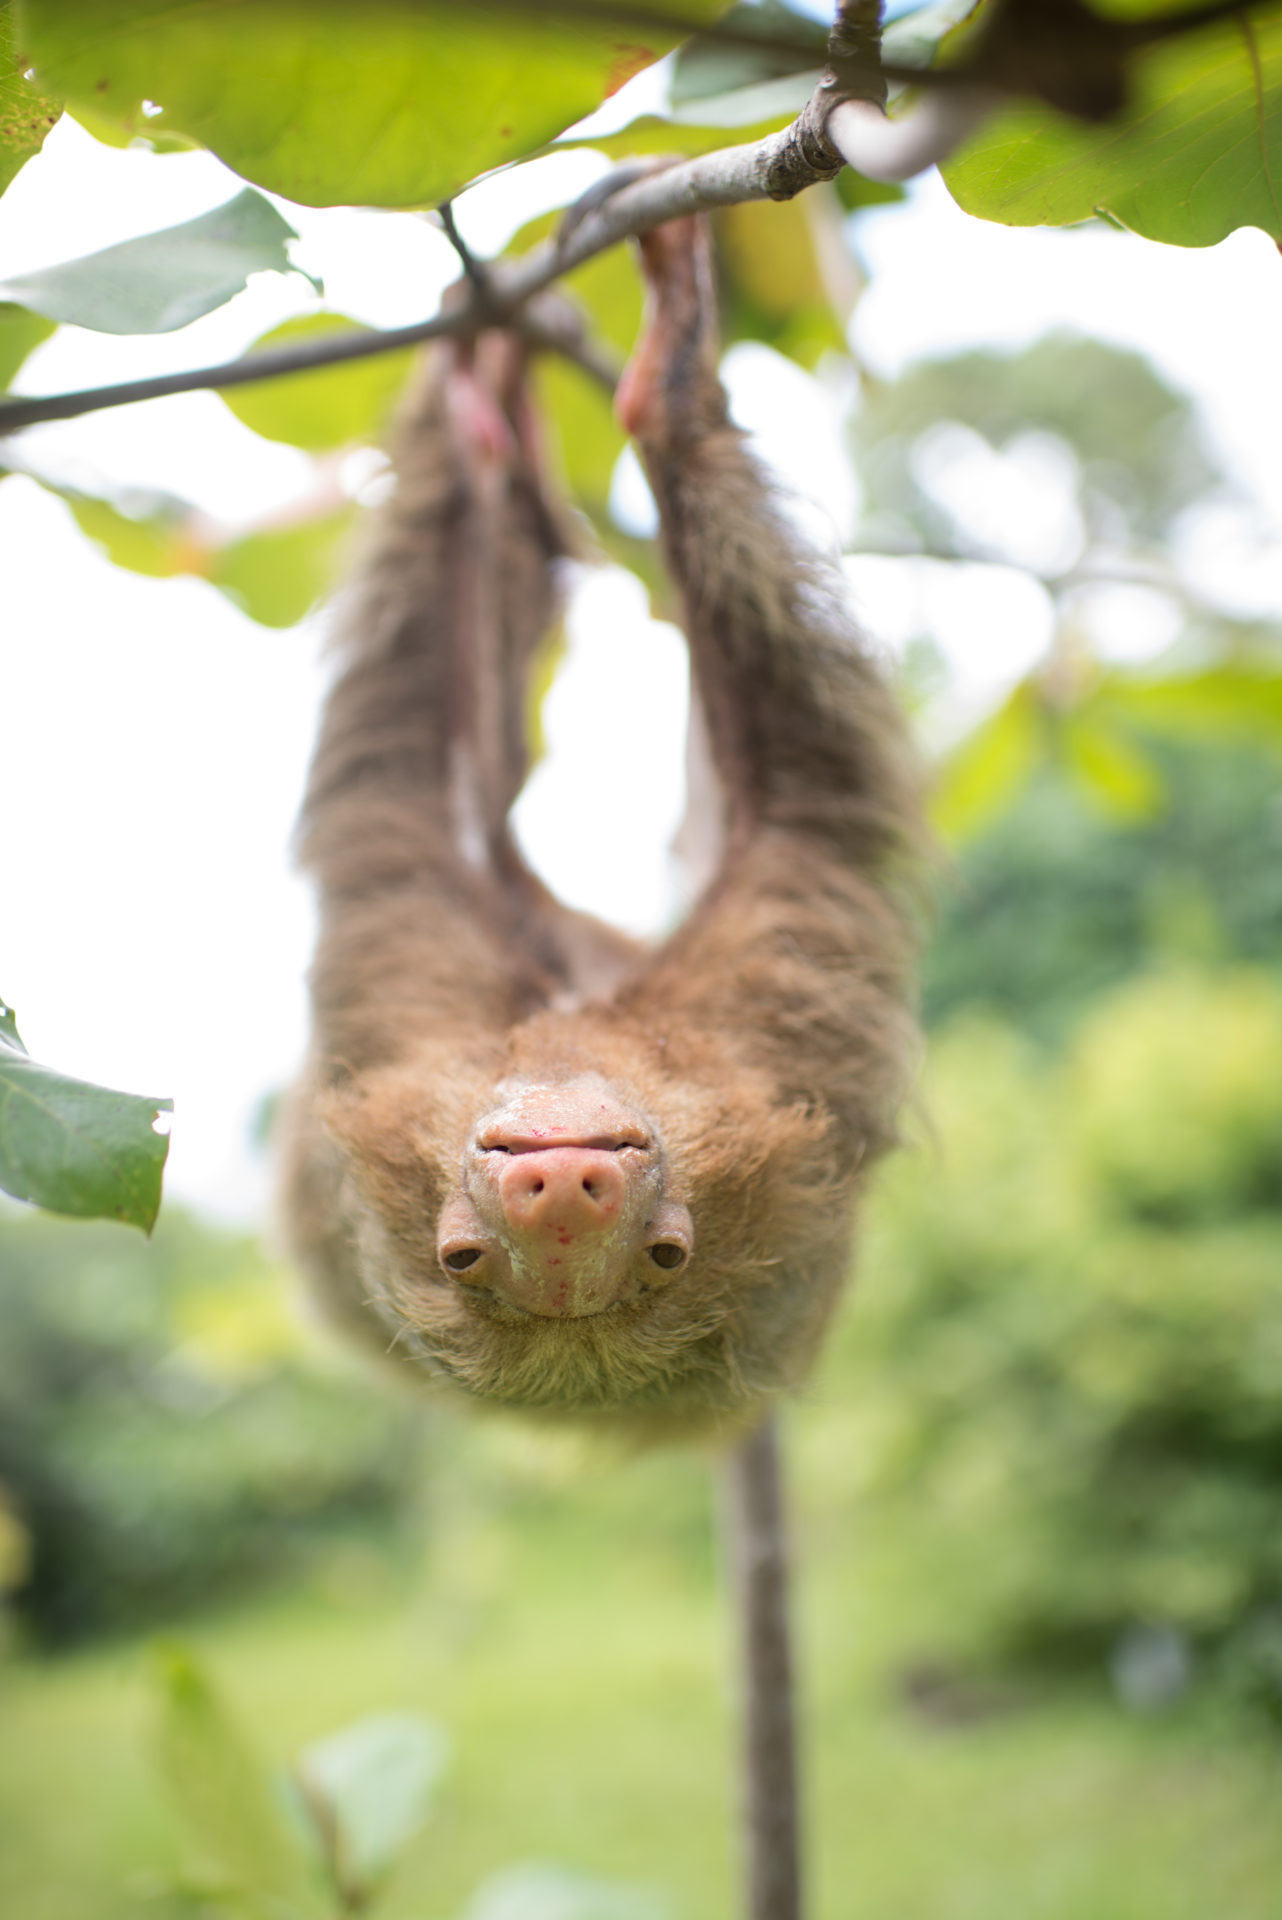 Electrocuted sloth recovering at tsi